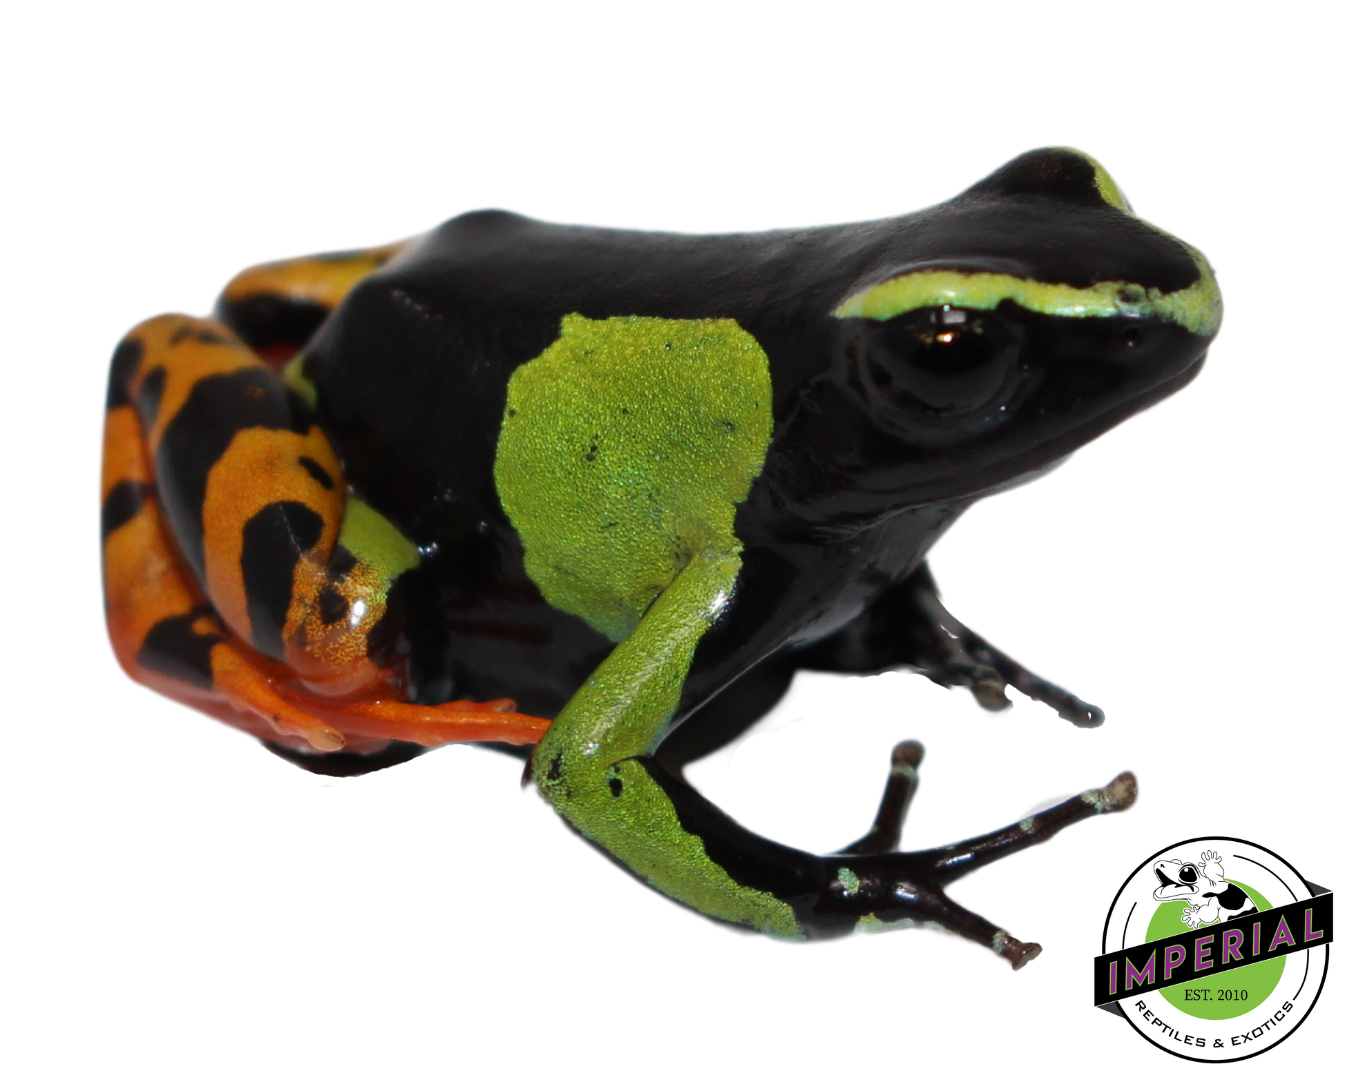 Painted Mantella for sale, reptiles for sale, buy reptiles online